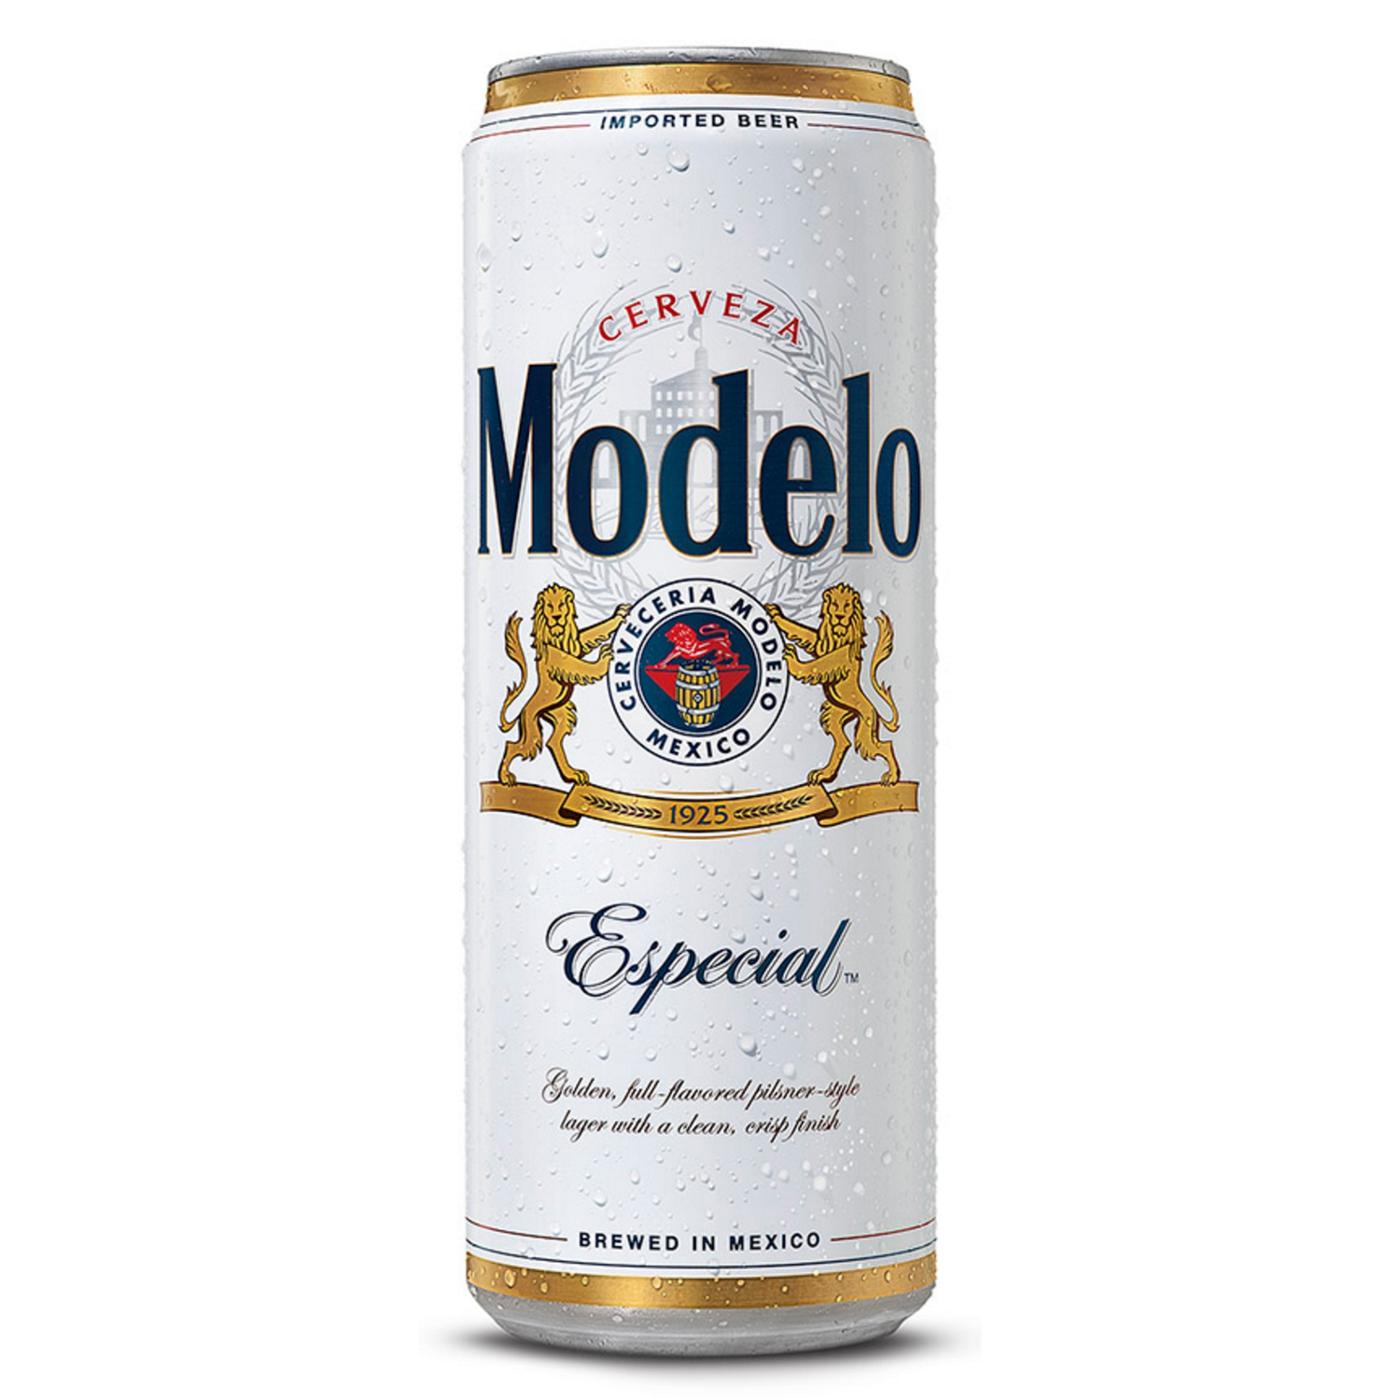 Modelo Especial Mexican Lager Import Beer 24 oz Cans, 3 pk; image 3 of 10